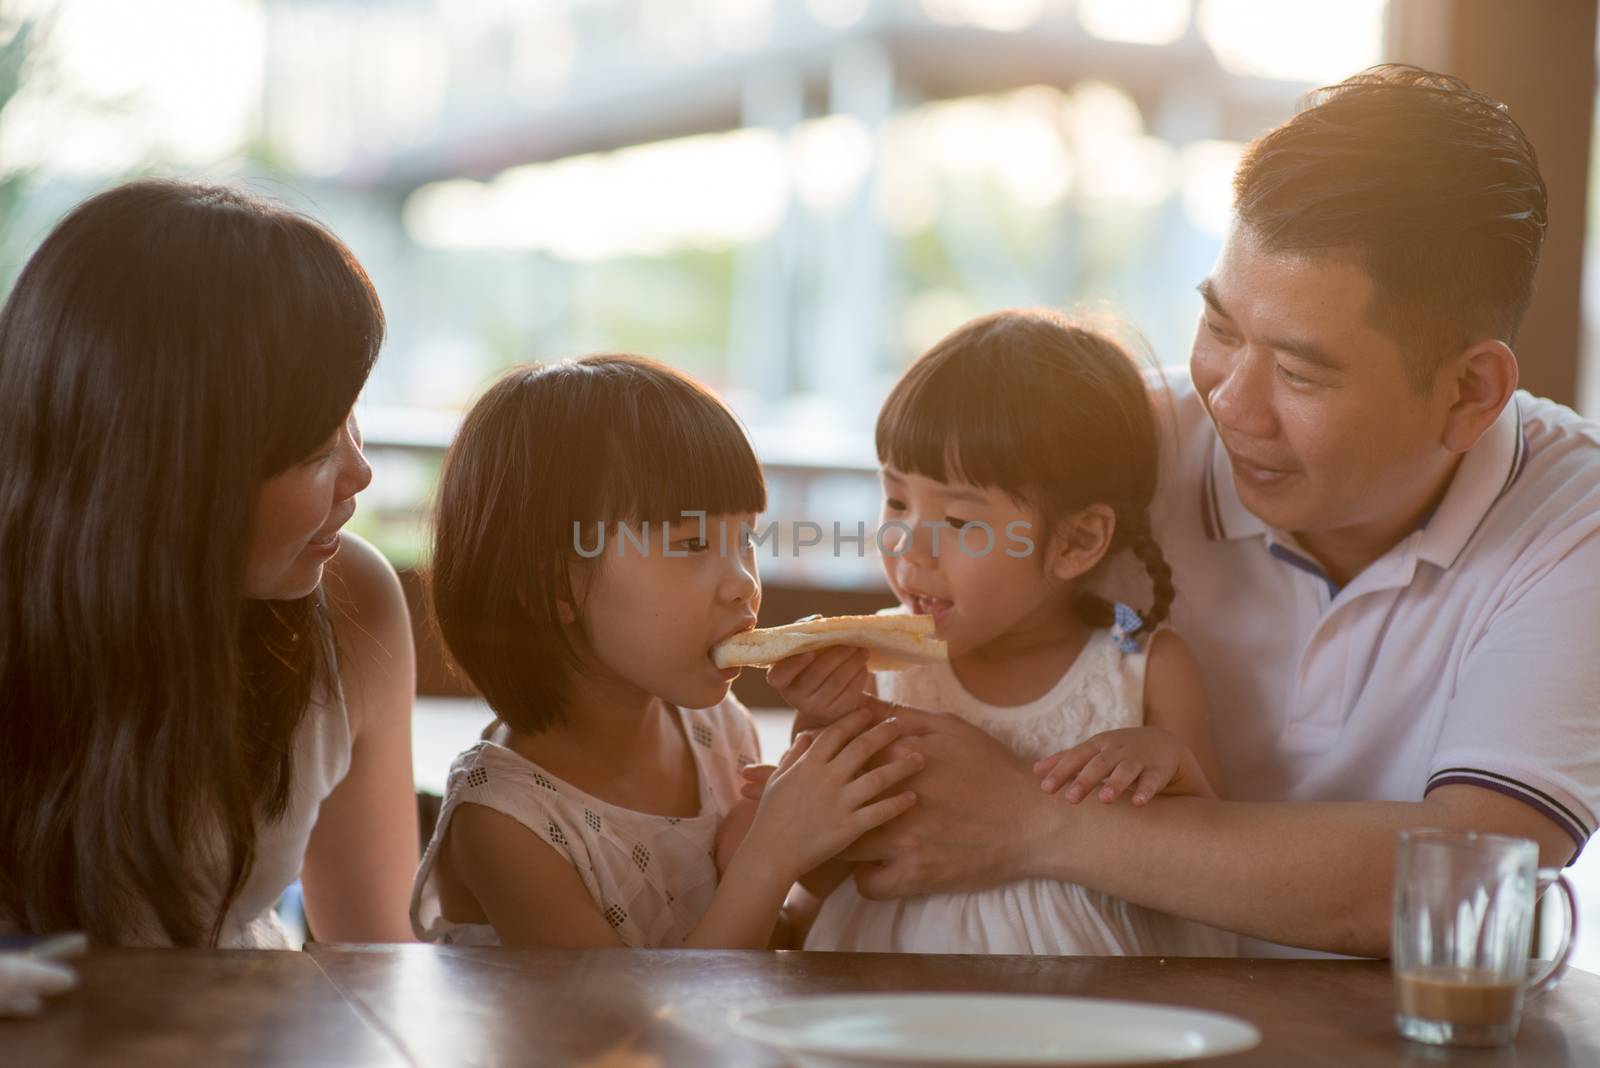 Adorable children eating and sharing butter toast at cafe. Asian family outdoor lifestyle with natural light.